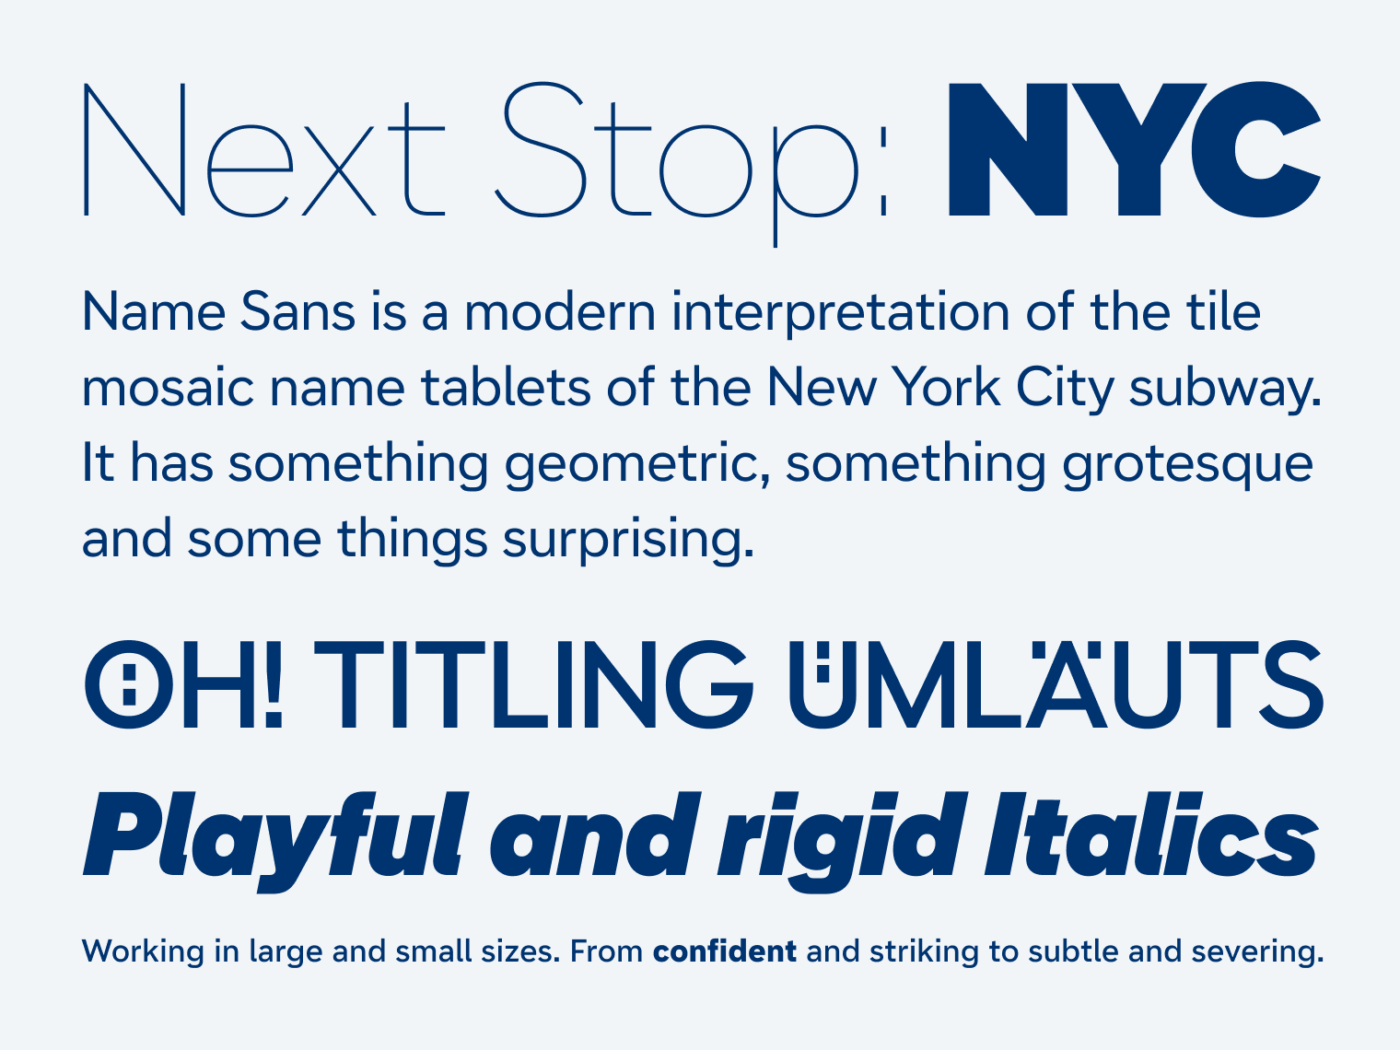 Next Stop: NYC

Name Sans is a modern interpretation of the tile mosaic name tablets of the New York City subway. It has something geometric, something grotesque and some things surprising.

Oh! Titling Umlauts

Playful and rigid Italics

Working in large and small sizes. From confident and striking to subtle and severing.